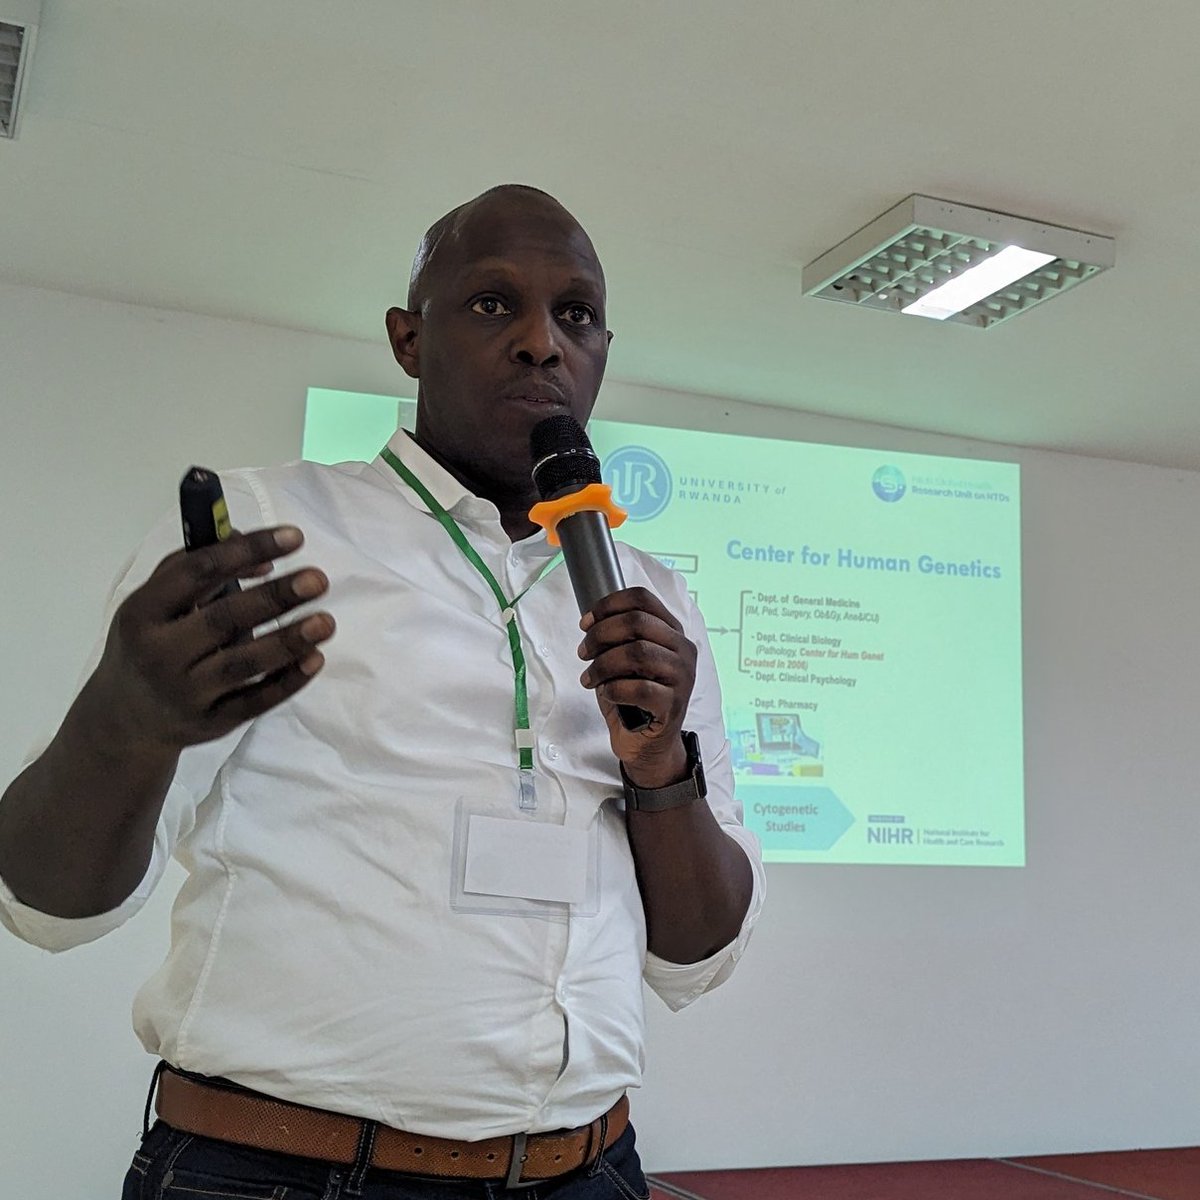 🧬👨🏾‍🔬 We are delighted to announce the launch of the Regional Hub for NTD genetics by Prof Leon Mutesa, Director of the Center for Human Genetics @Uni_Rwanda and PI @NIHRglobal GHRU explains the Hub will allow: 🔹Joint training 🔹Sharing knowledge 🔹Research specific to #NTDs 👏🏾